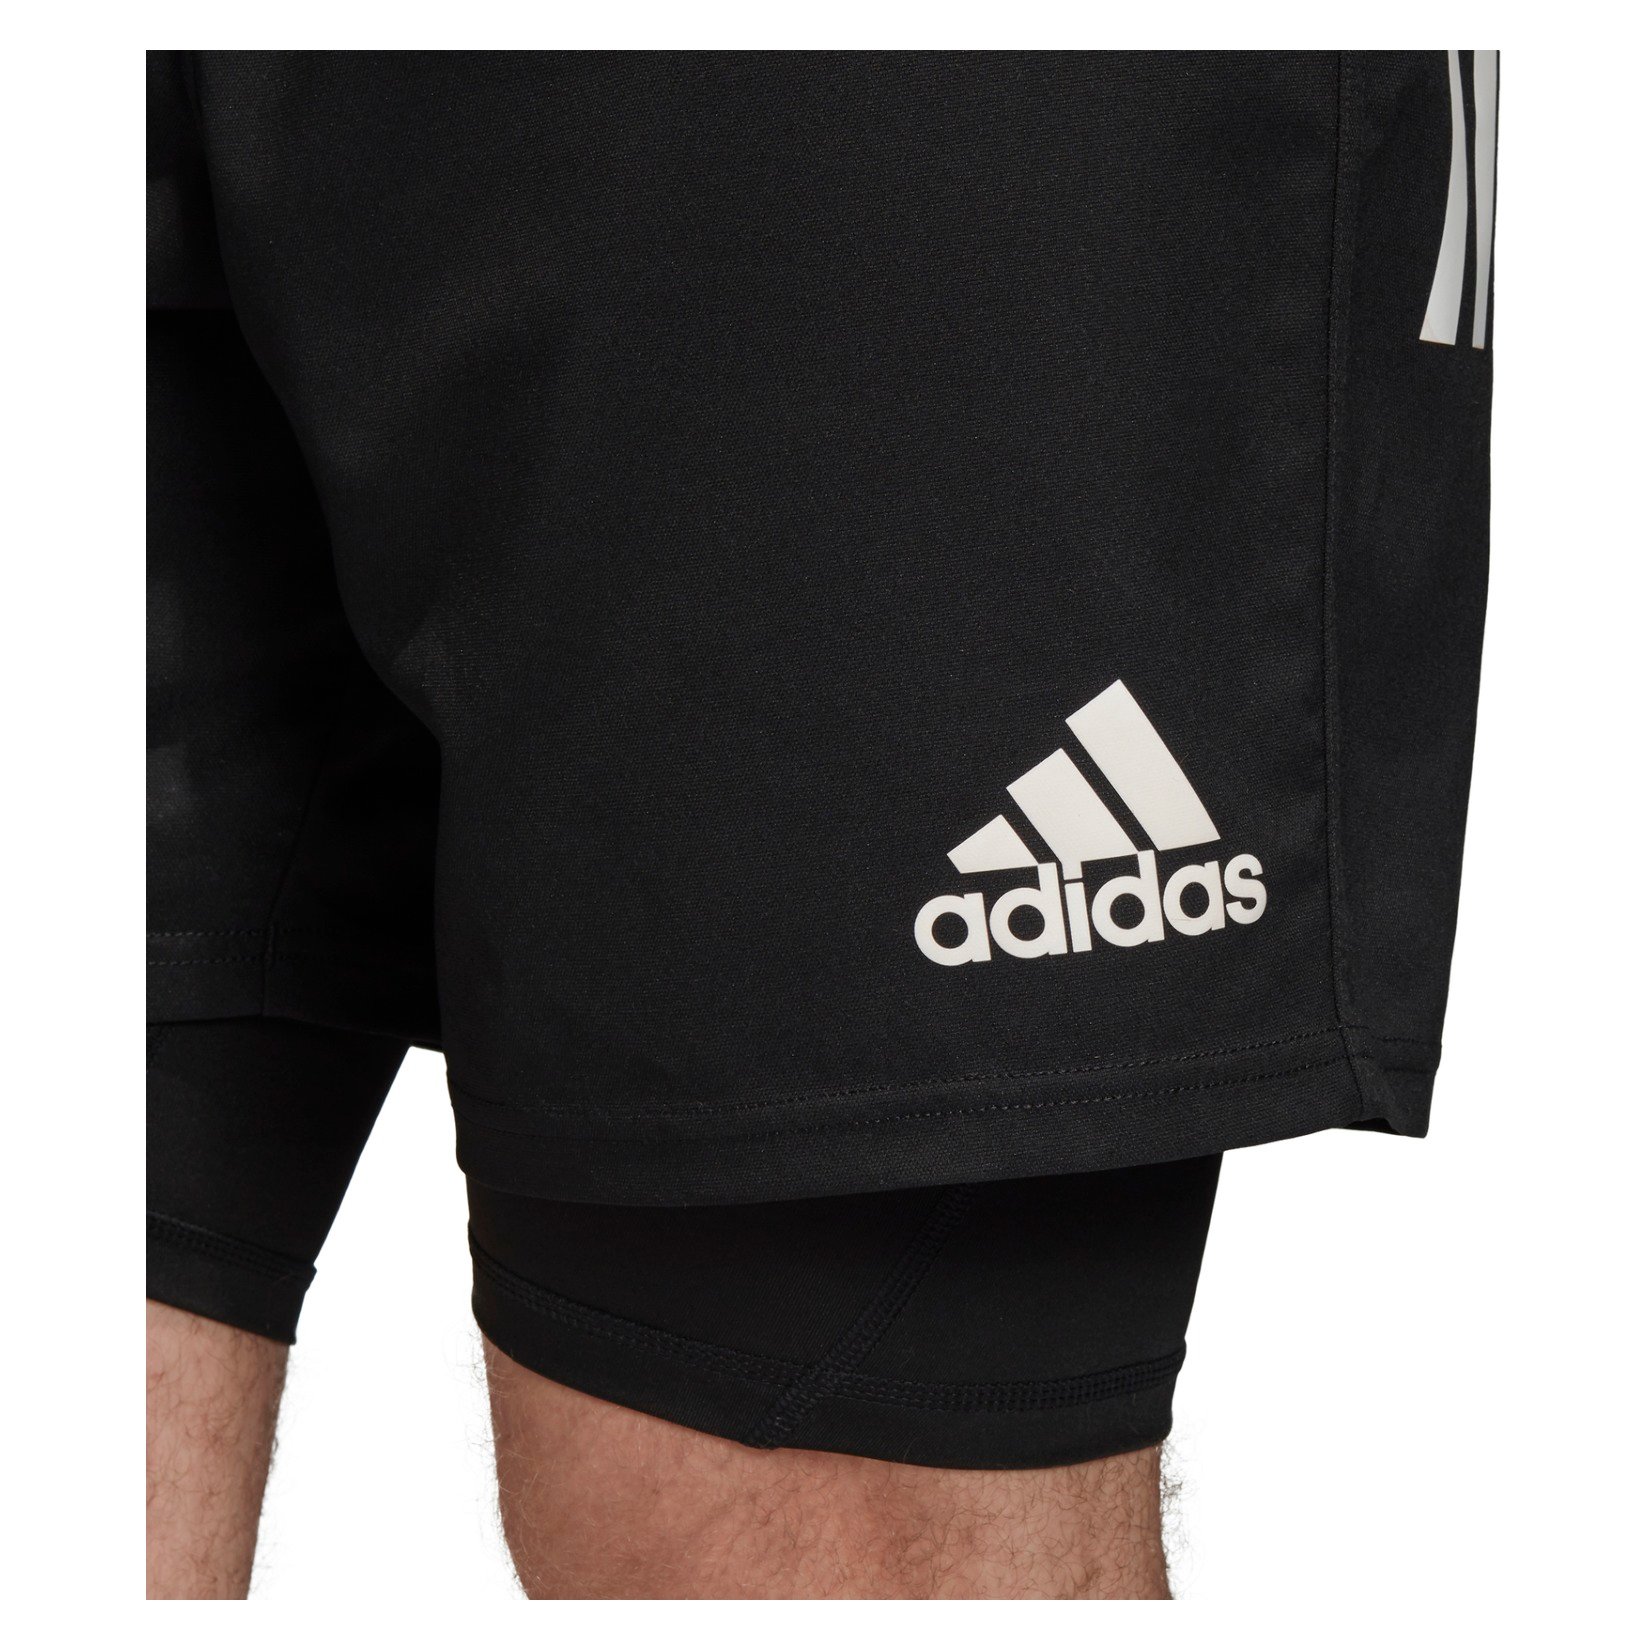 adidas Classic 3S Rugby Shorts